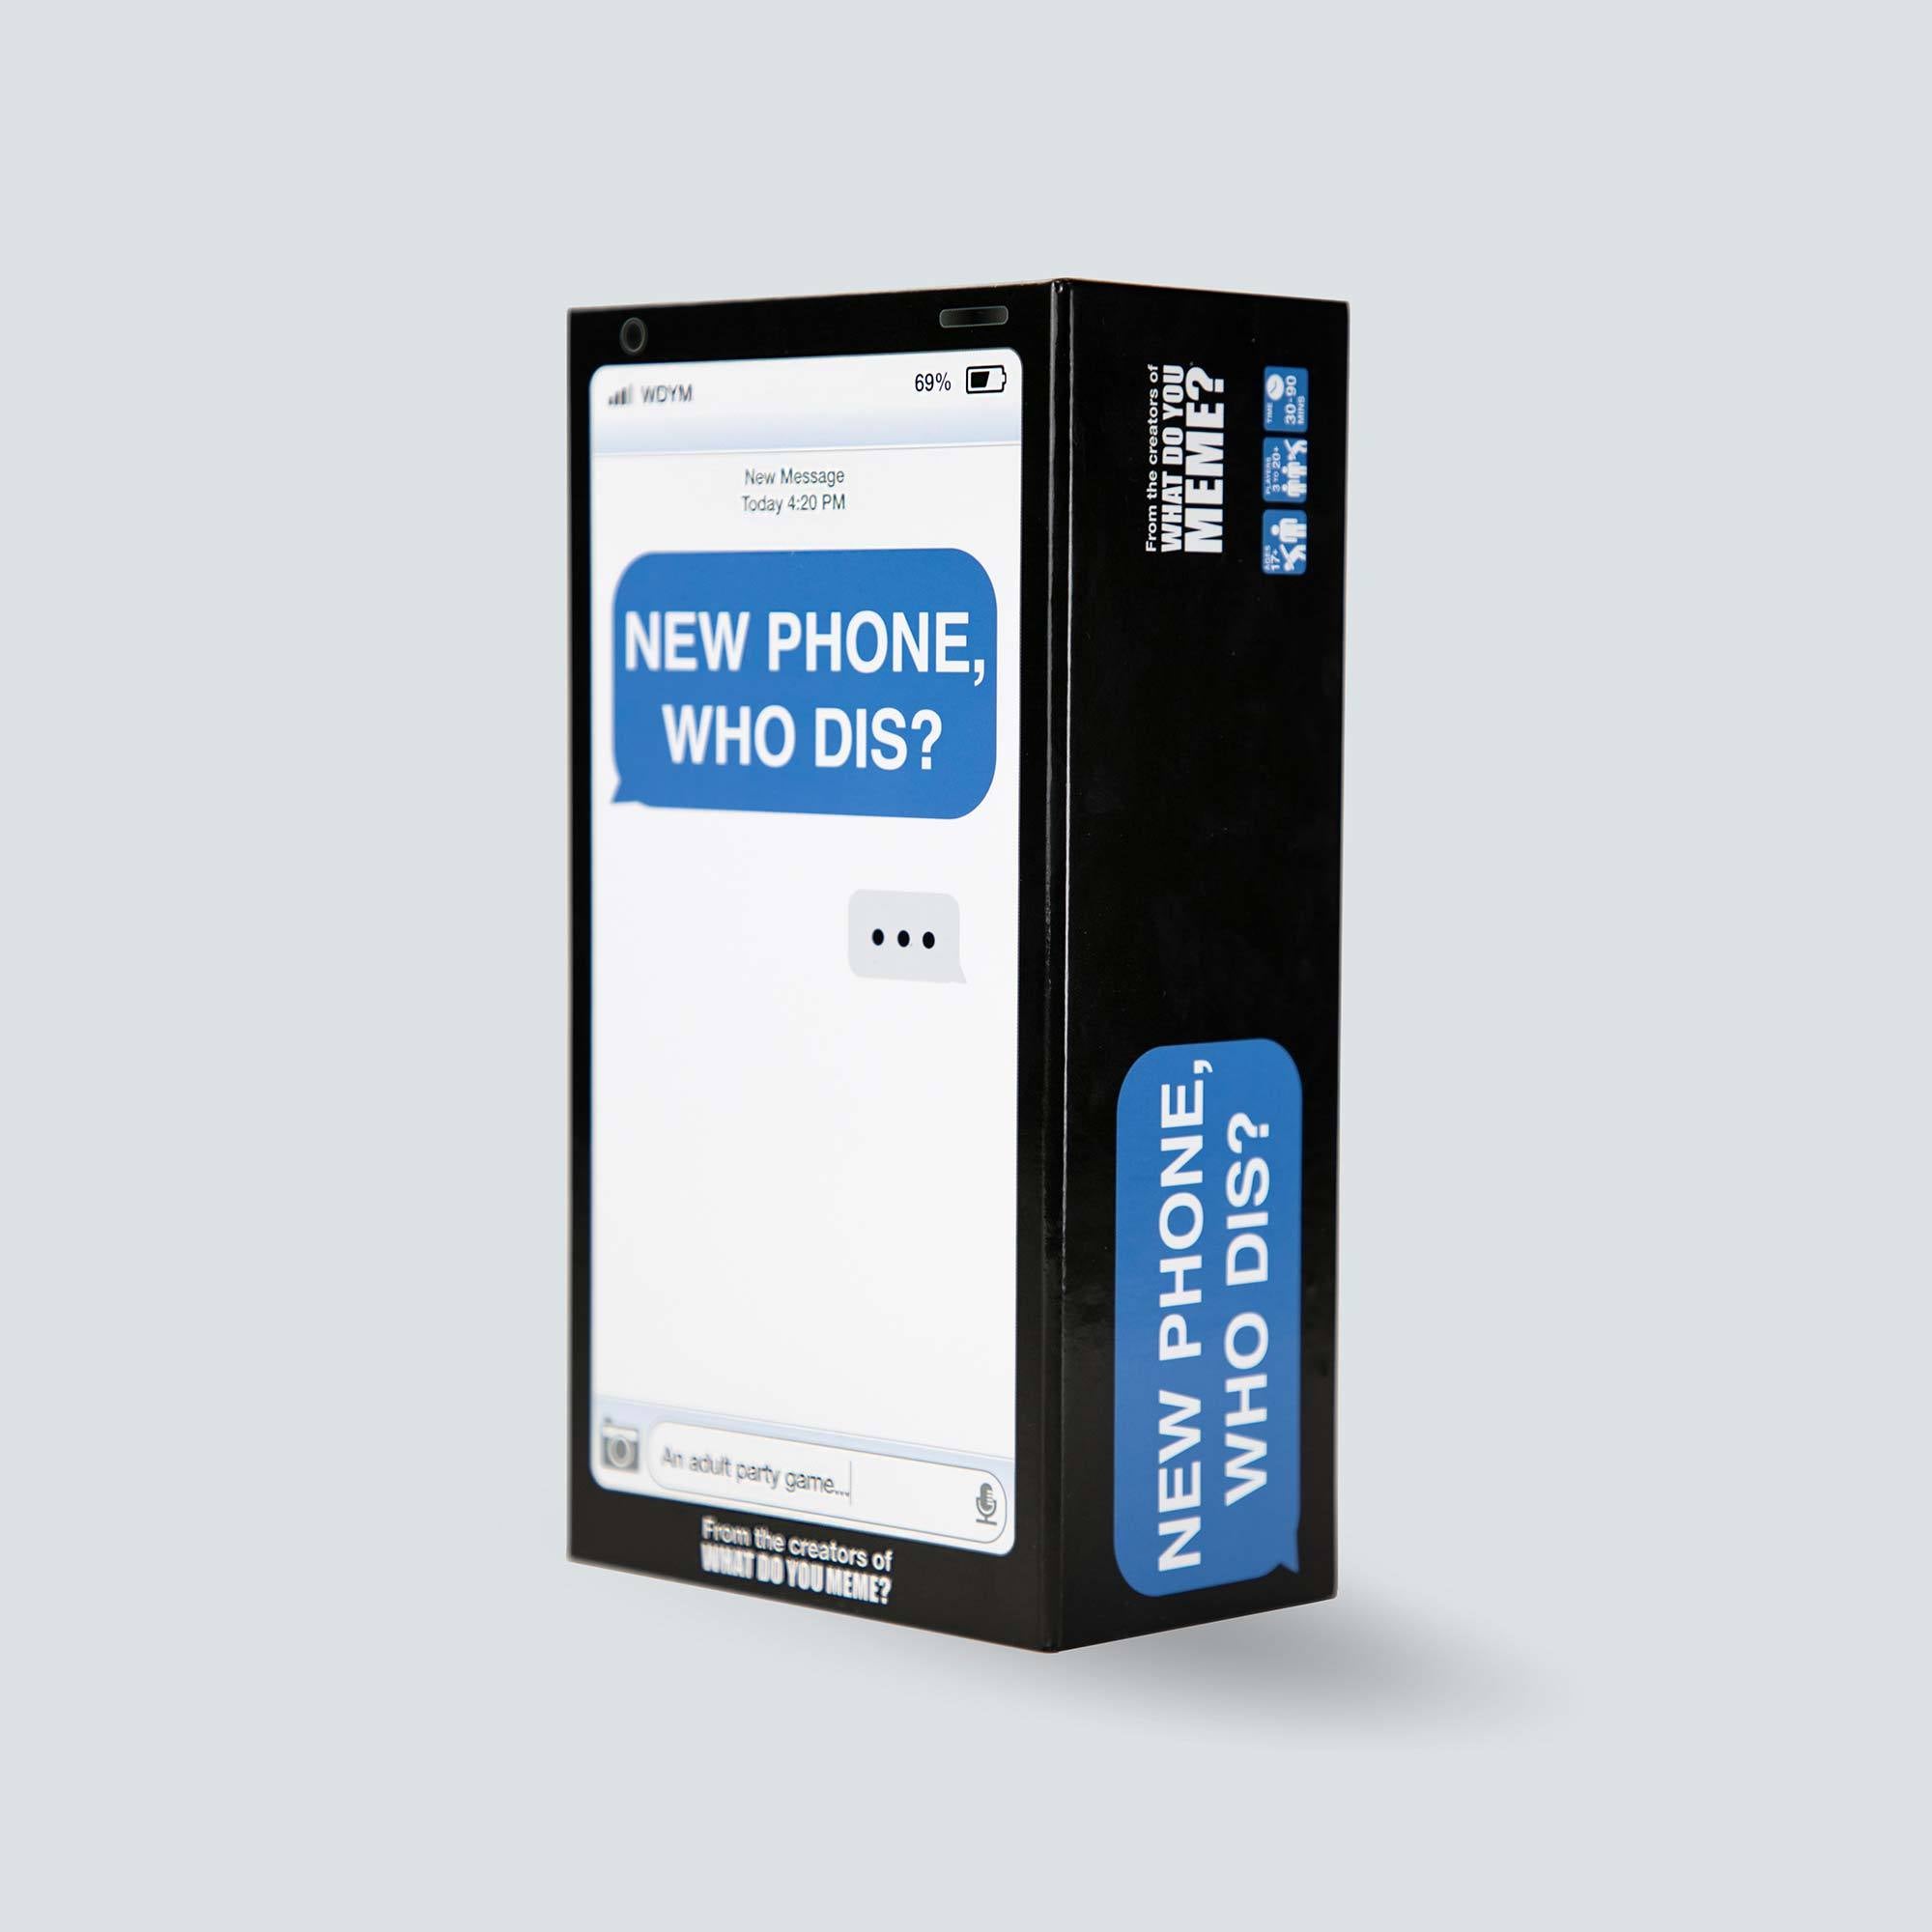 New Phone, Who Dis?™ Text Message Party Card Game – Relatable